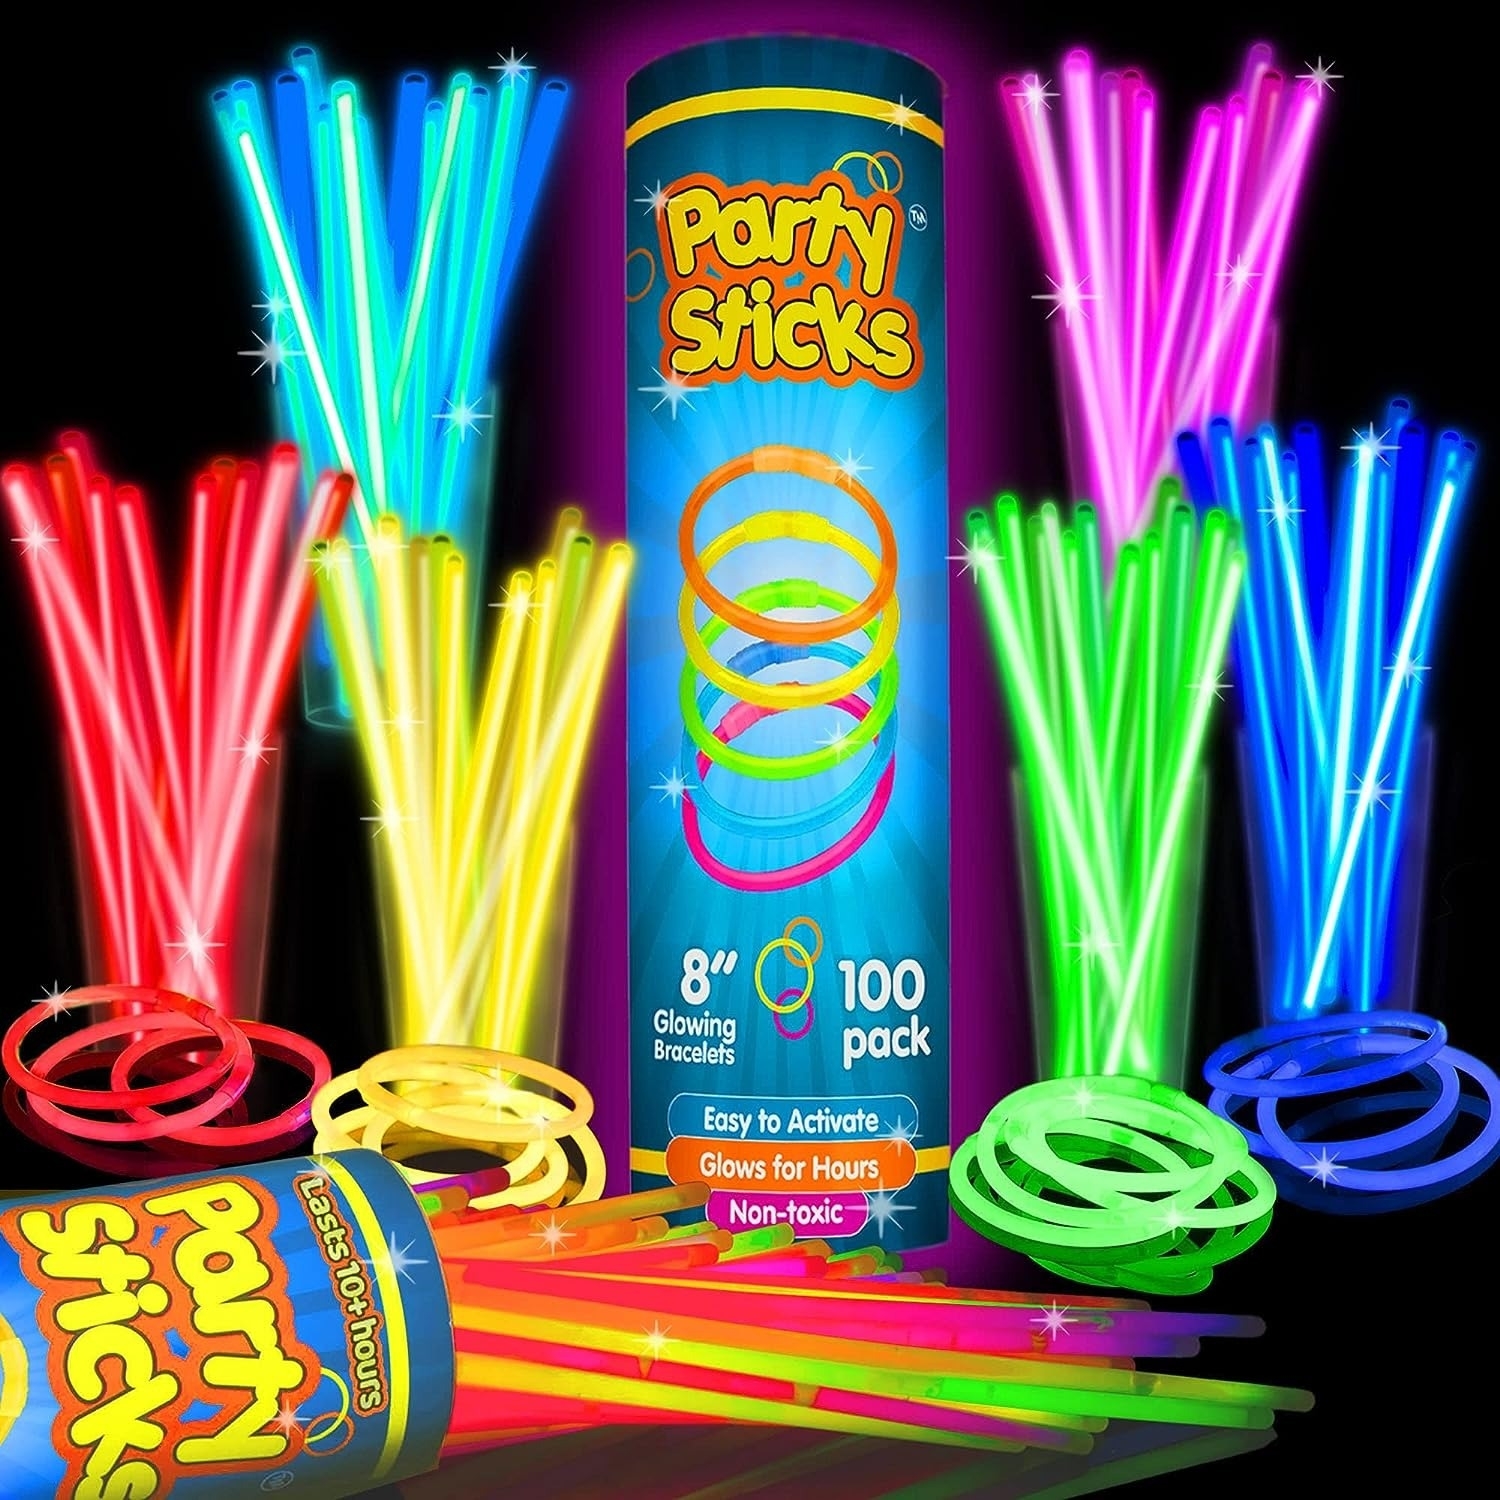 Glow sticks in various colors packaged in tubes with text &quot;Party Sticks, 8&quot; Glowing Bracelets, 100 pack&quot;